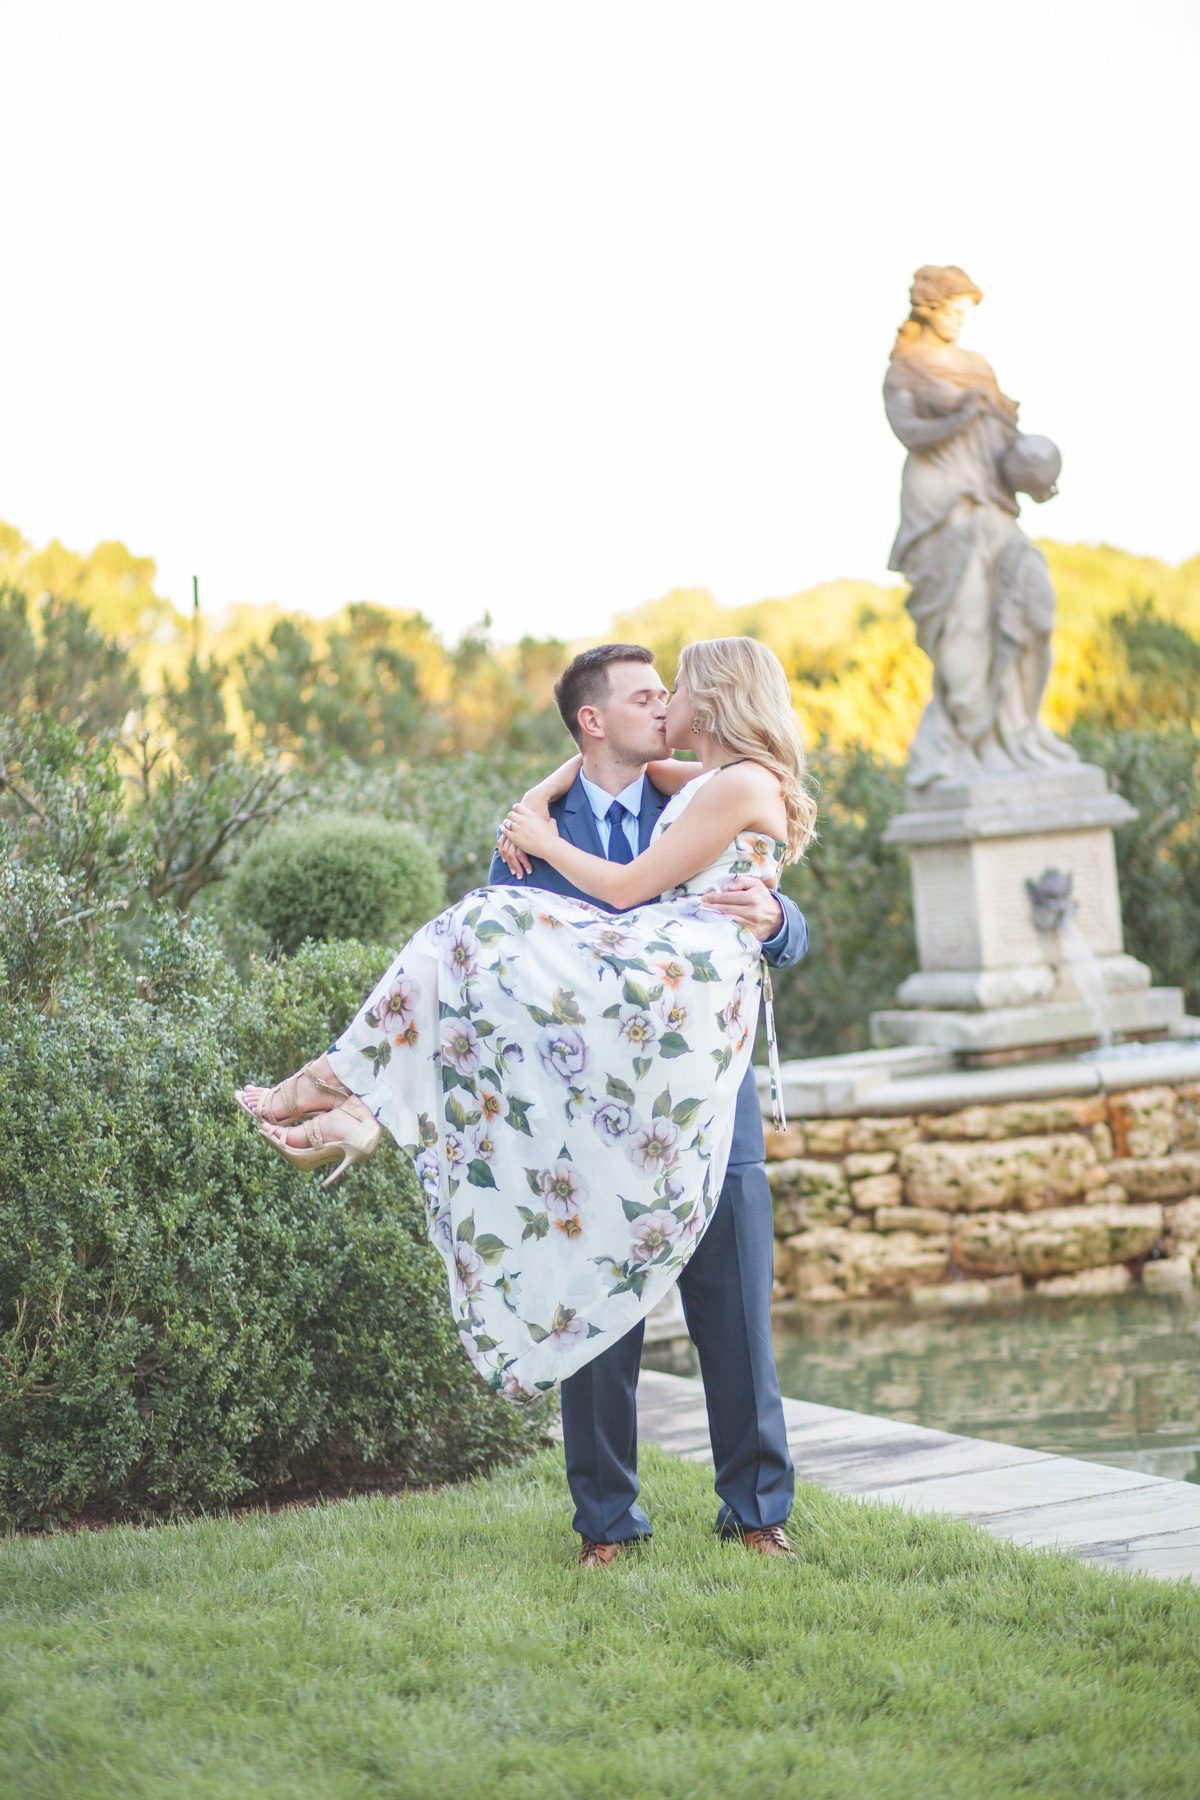 engagement photo session at Cheekwood Gardens in Nashville TN